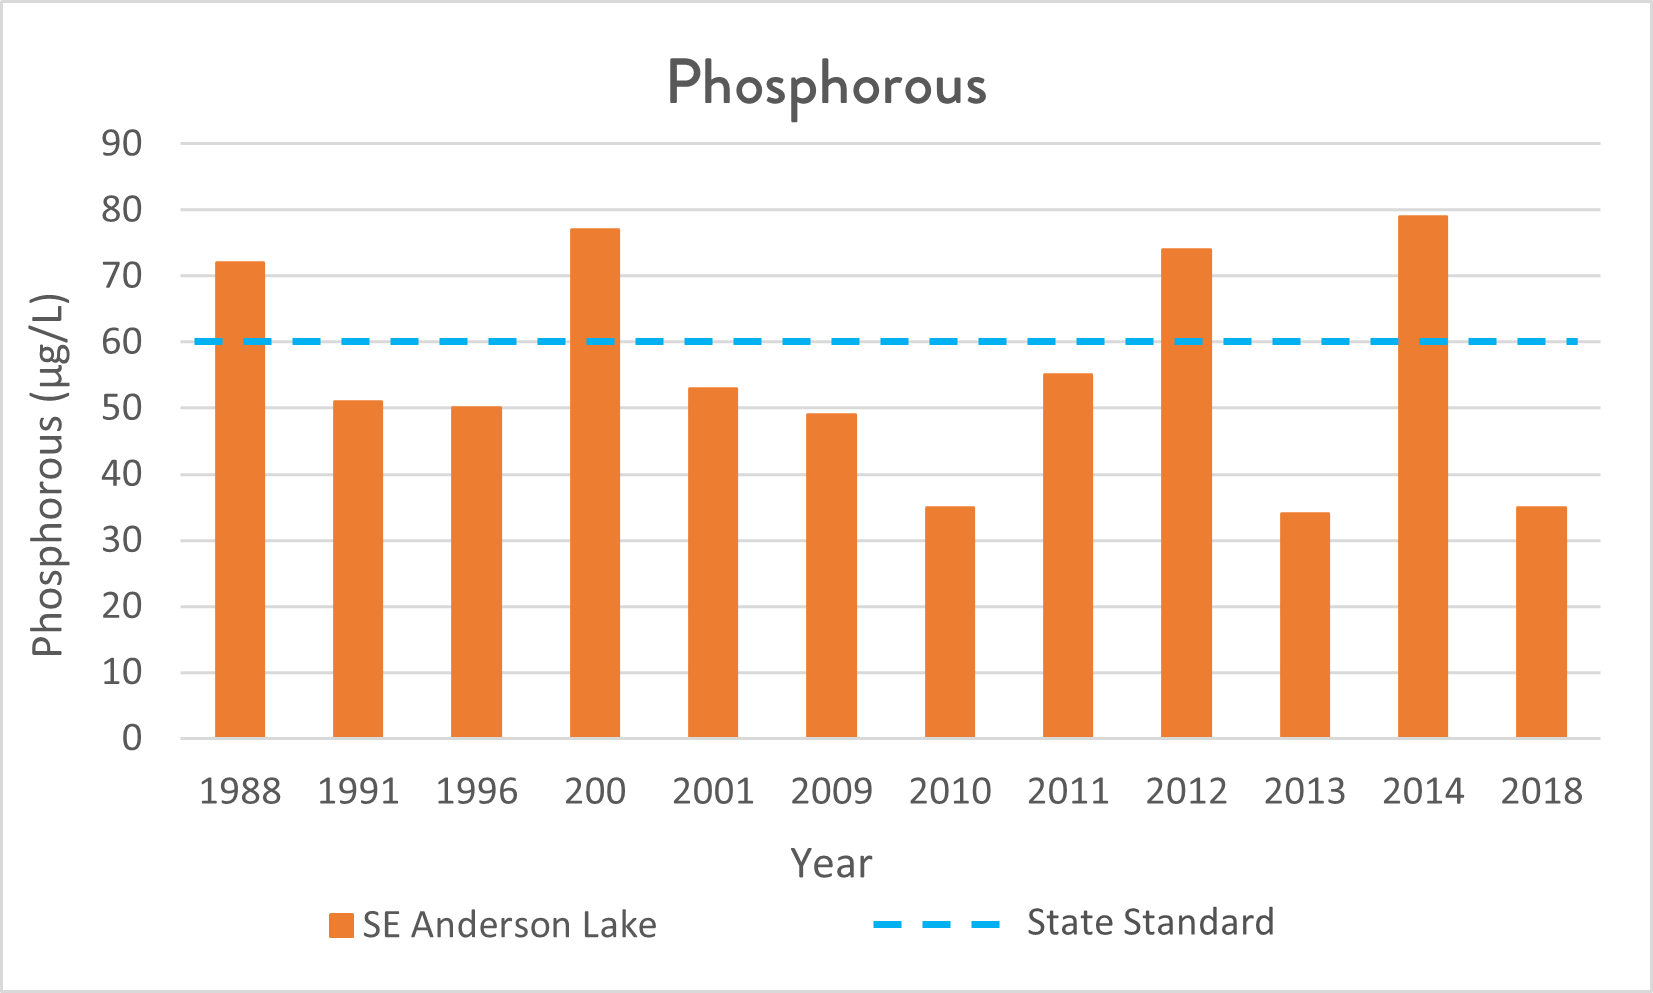 graph of phosphorous levels in SE Anderson Lake from 1988 to 2018